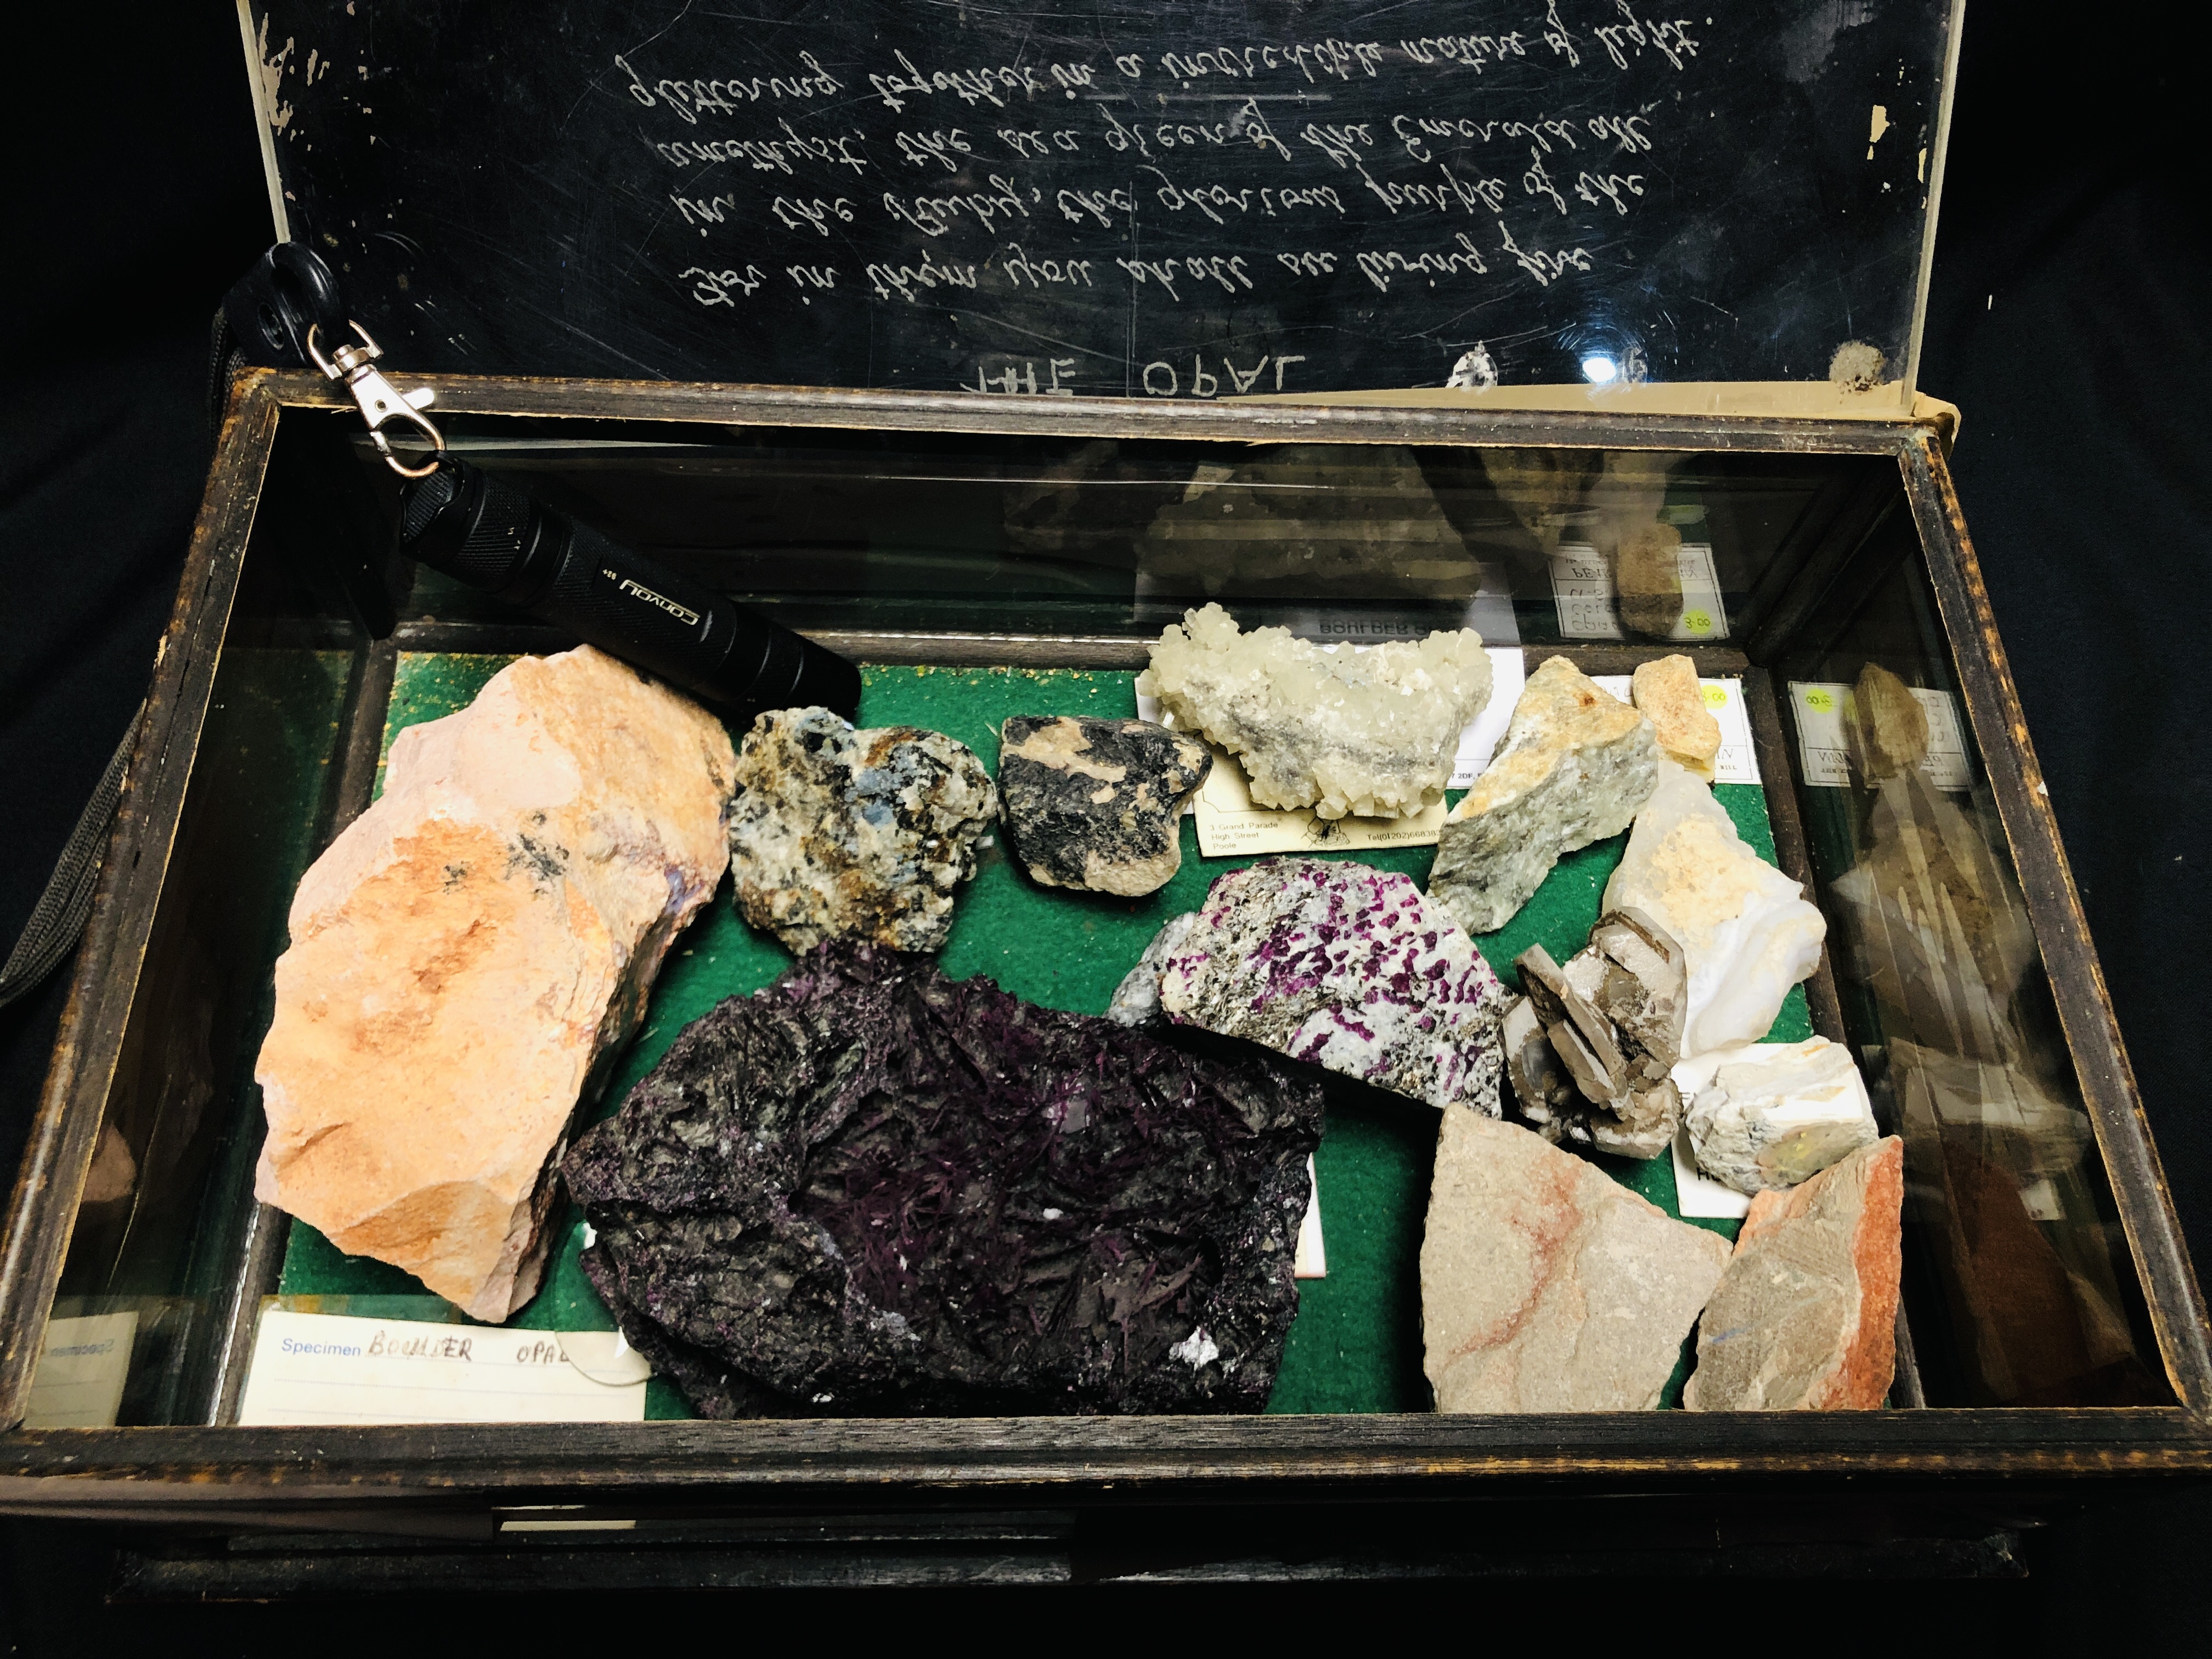 A COLLECTION OF CRYSTAL AND MINERAL ROCK EXAMPLES IN A DISPLAY CASE INSCRIBED "THE OPAL" FOR IN